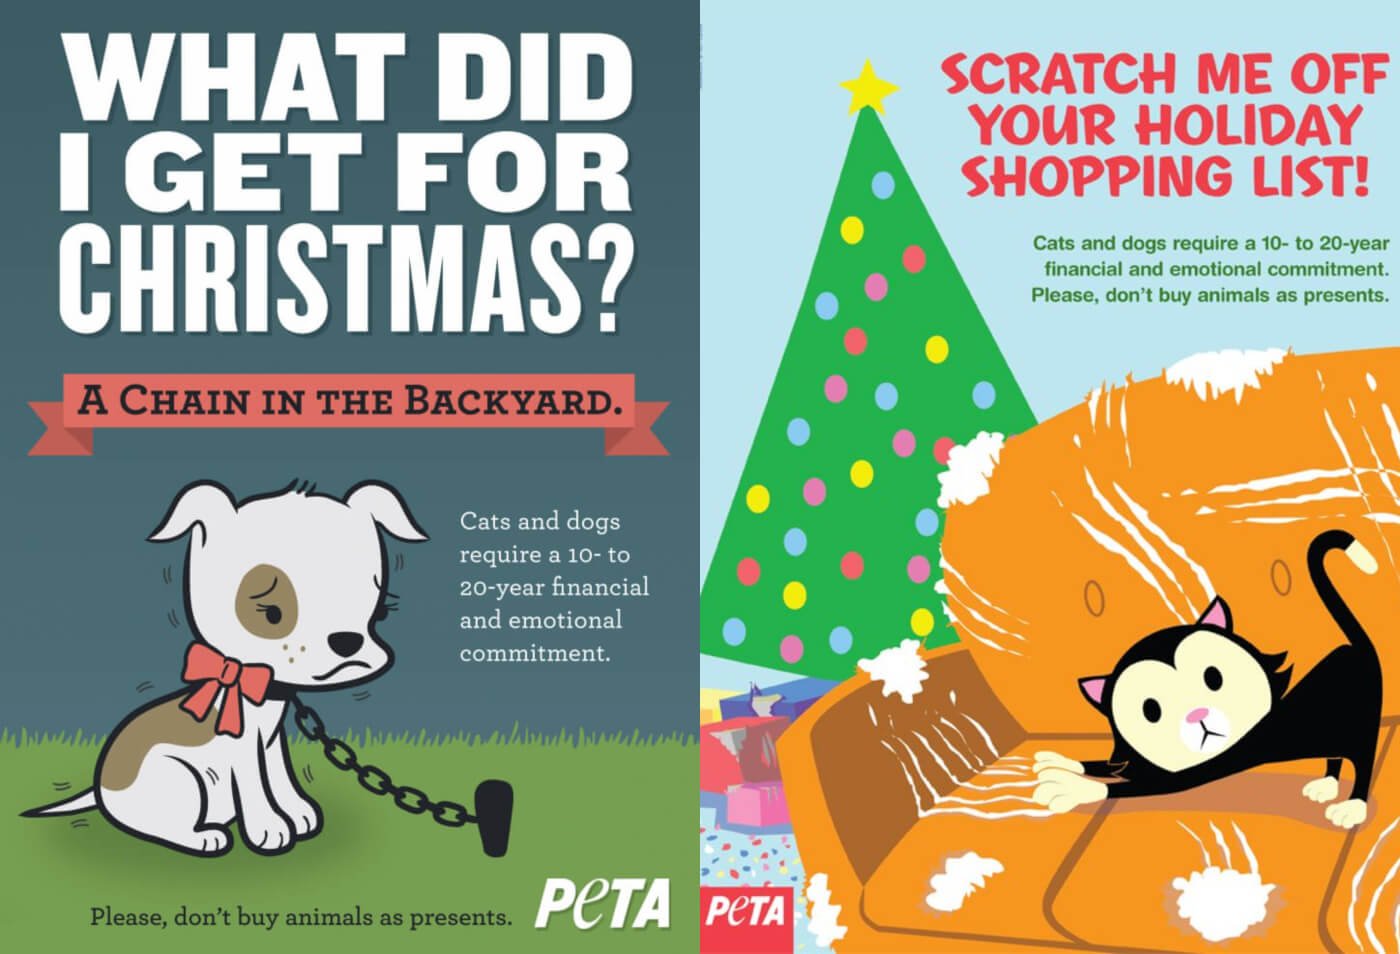 Dog Christmas Gifts for Dog Owners: The Best 10 List For You